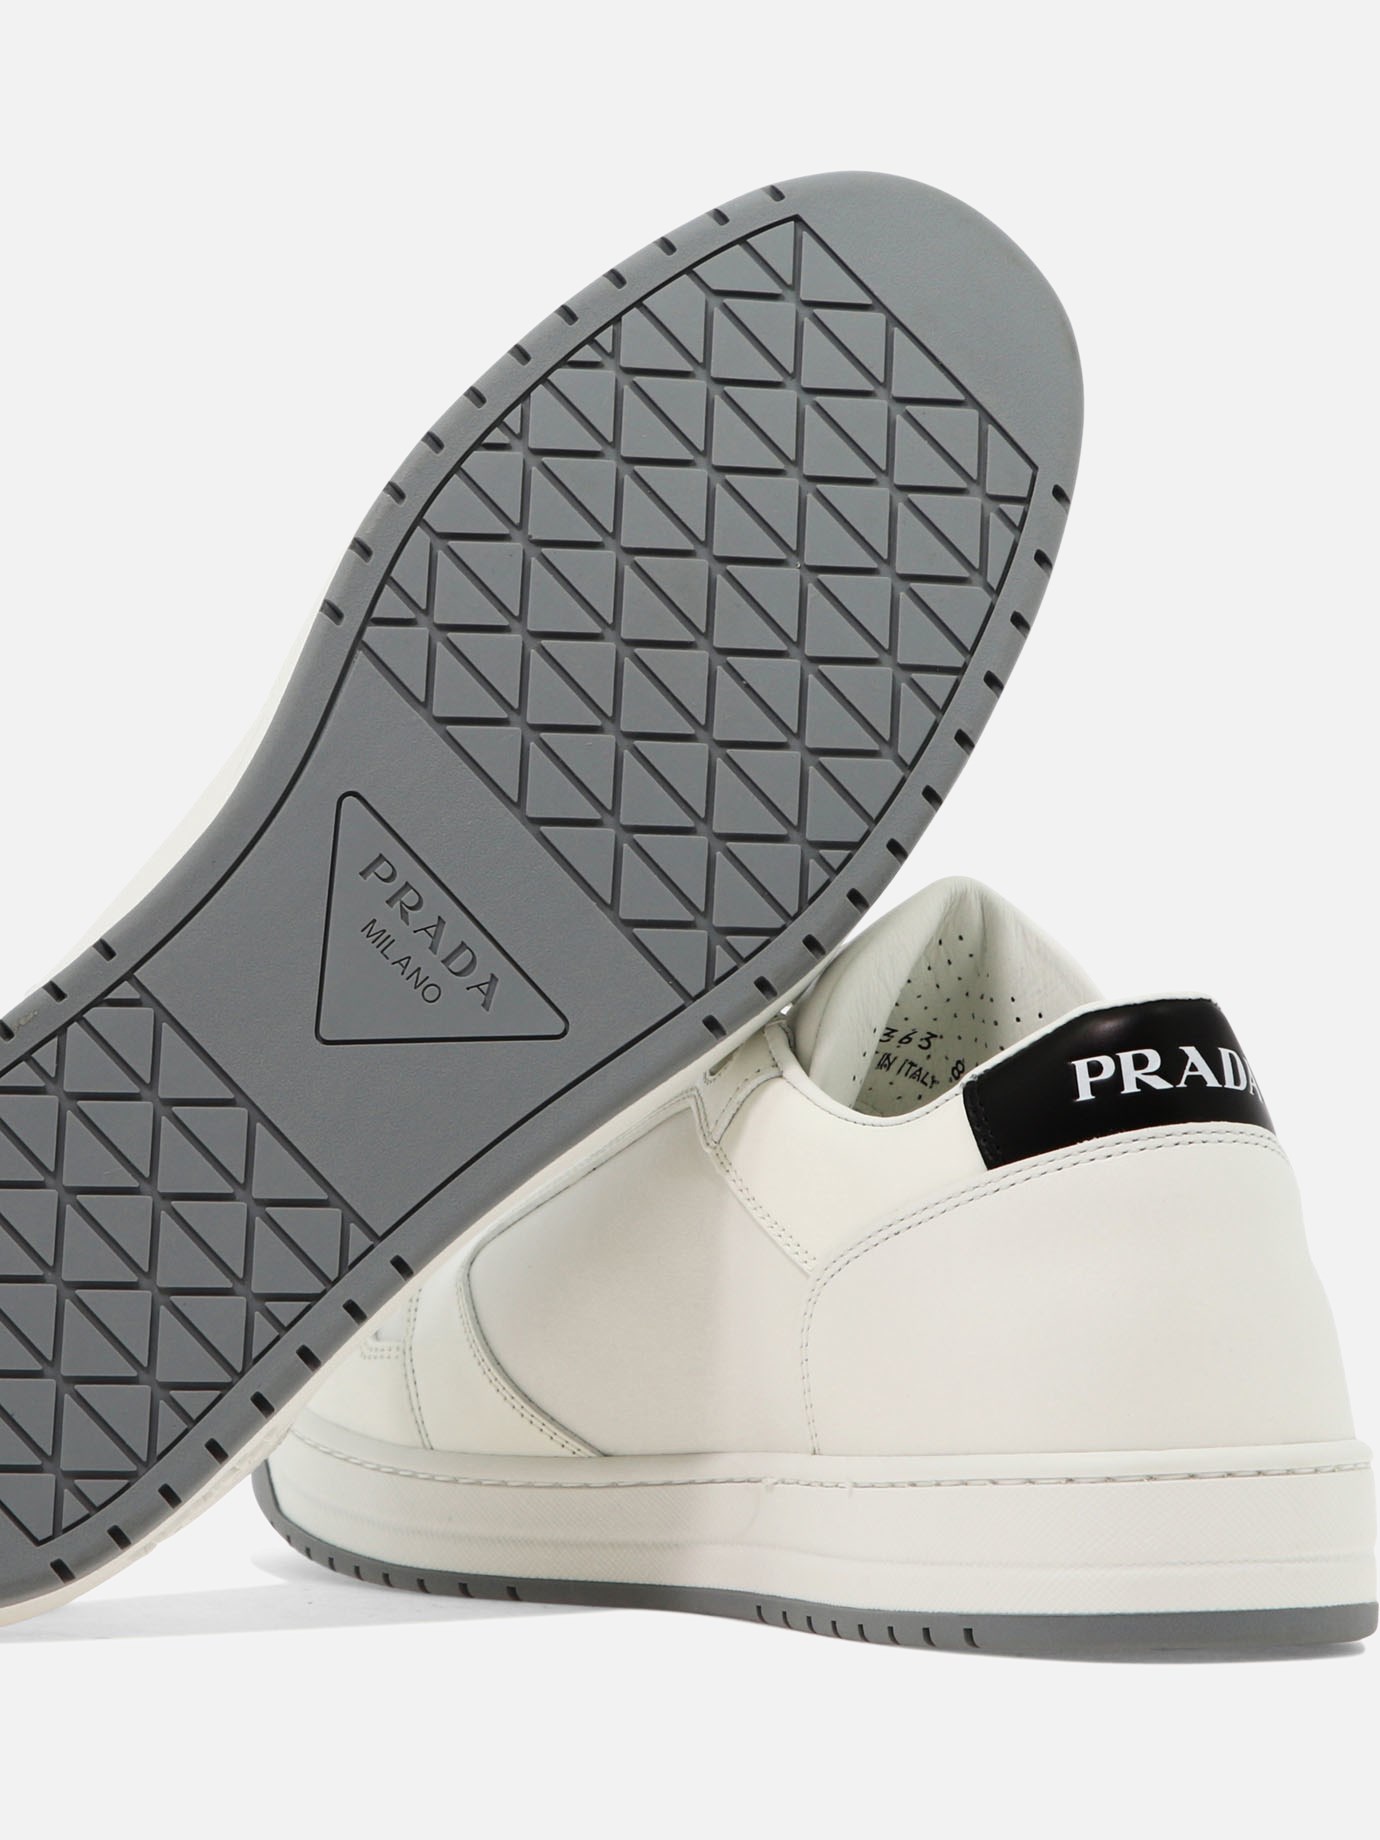  District  sneakers by Prada